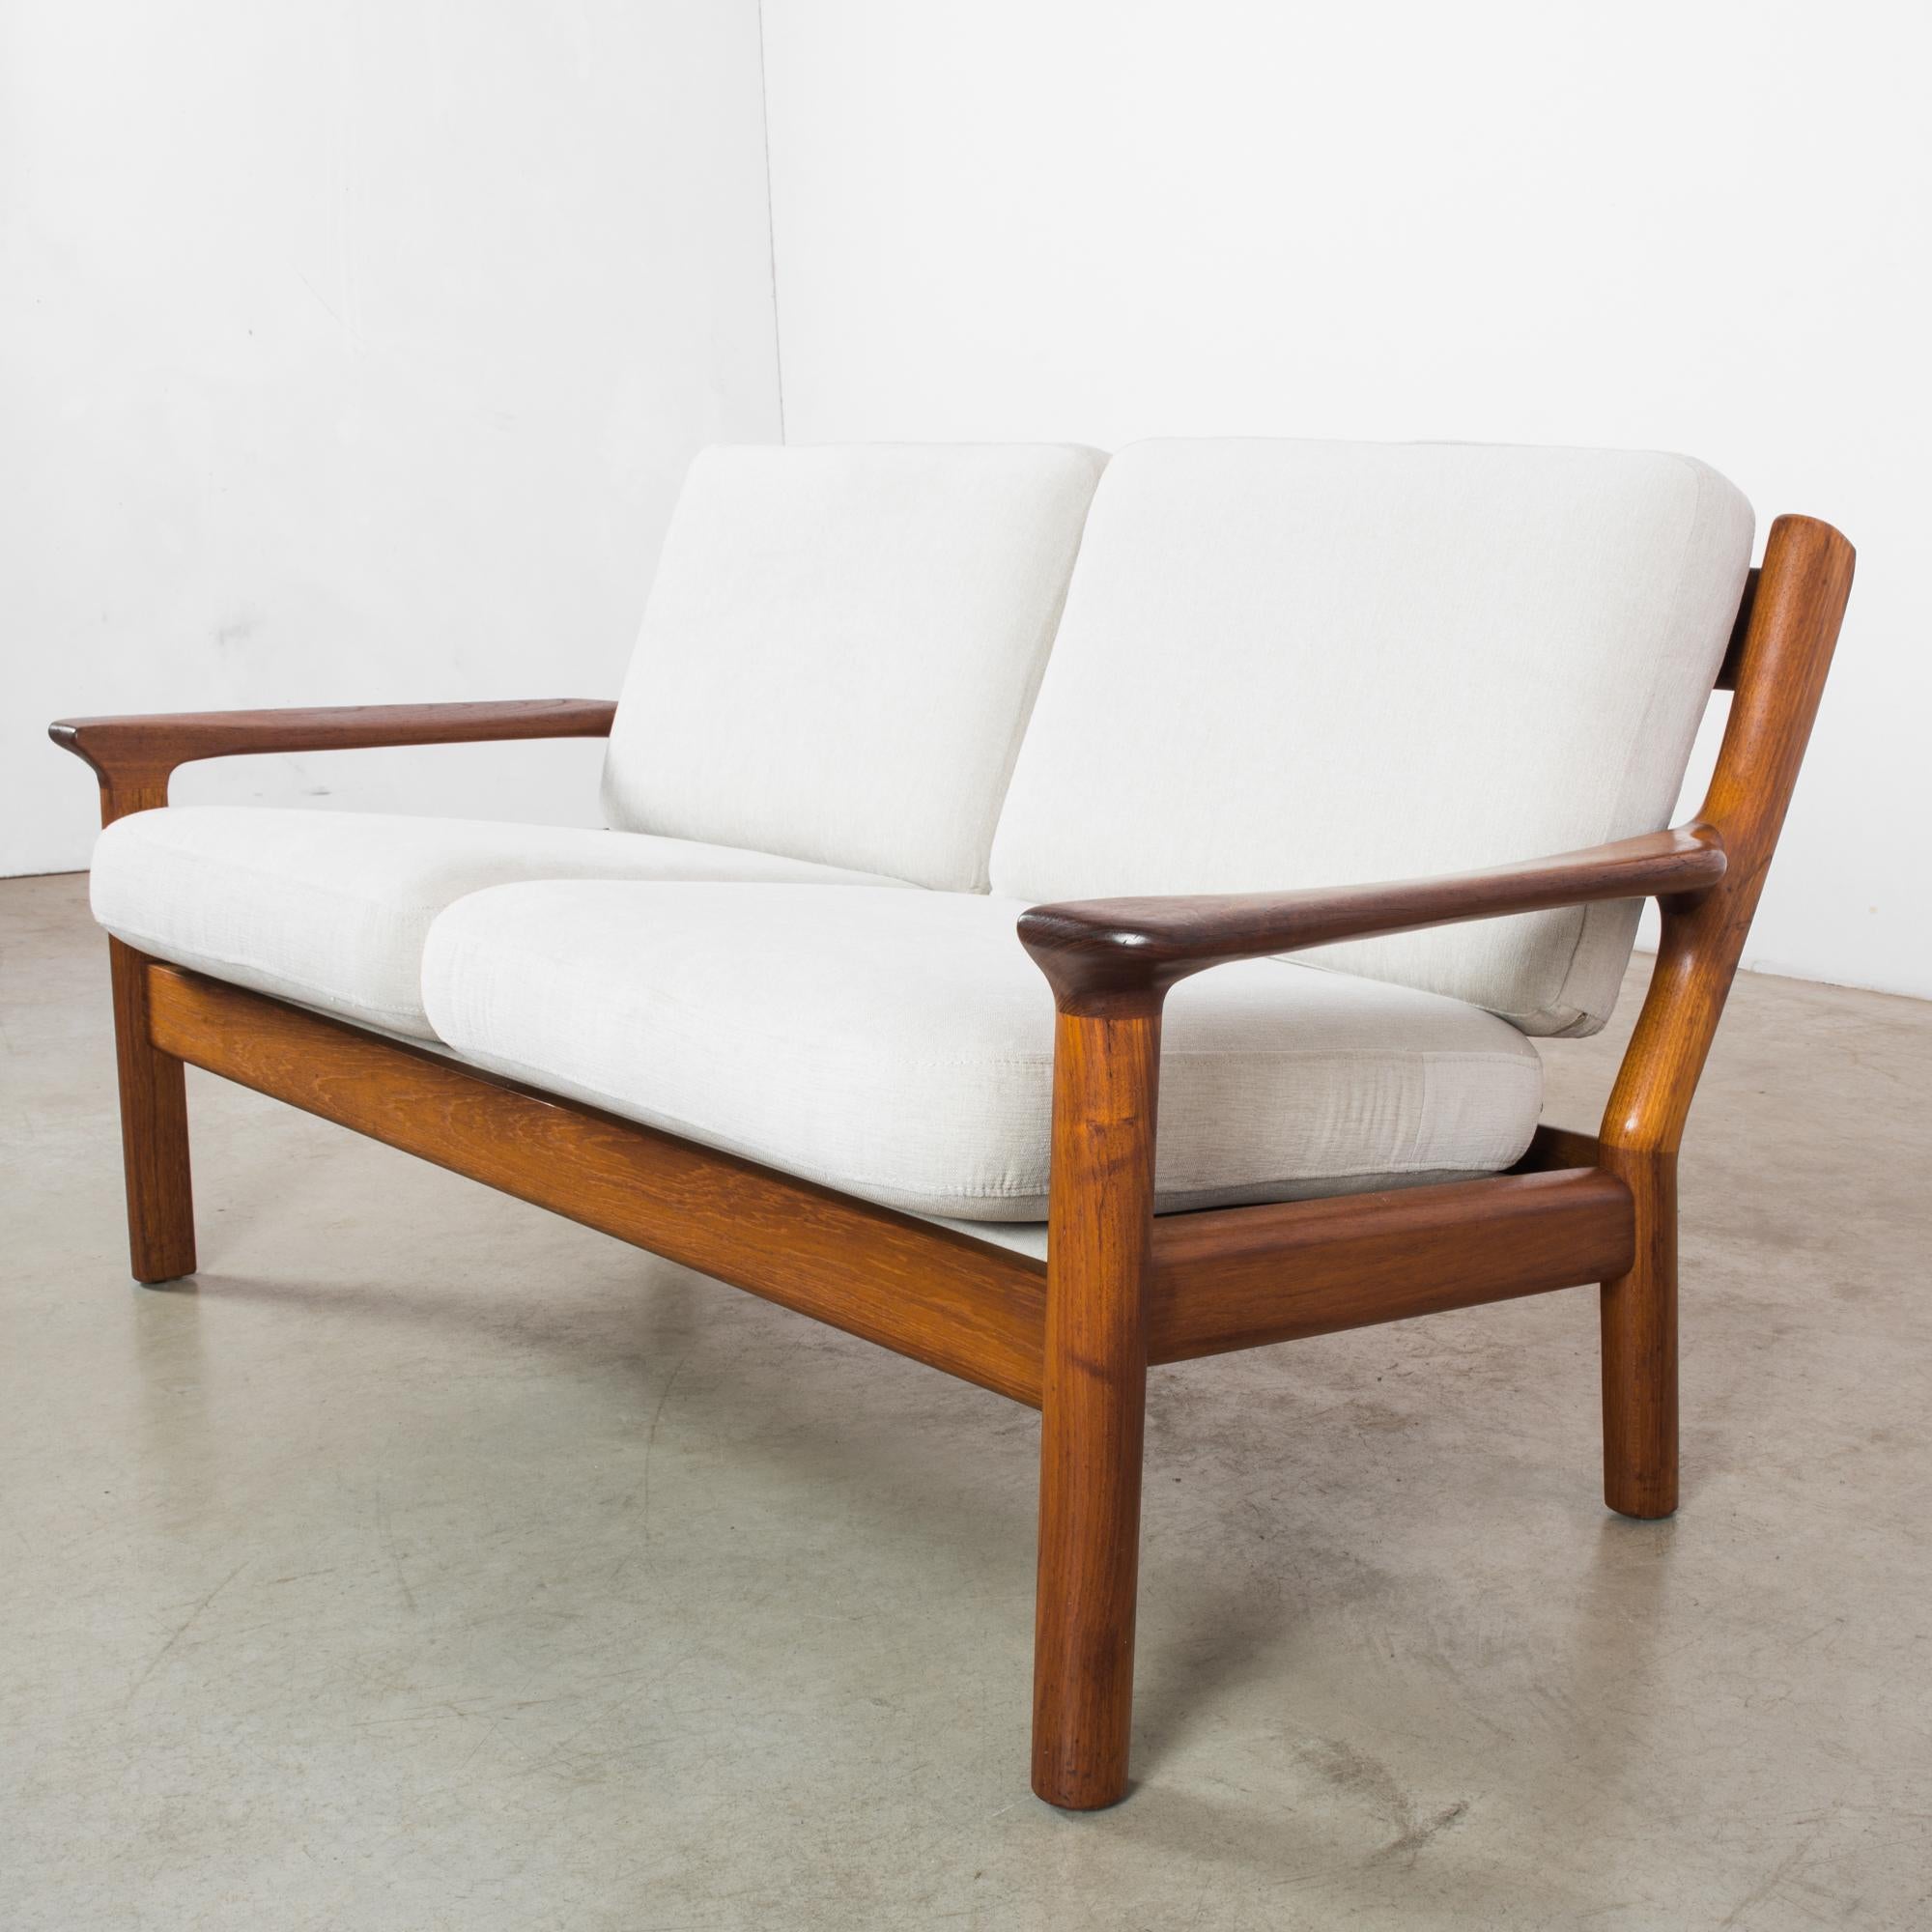 1960s Danish Teak Sofa with Upholstered Seat and Back 3